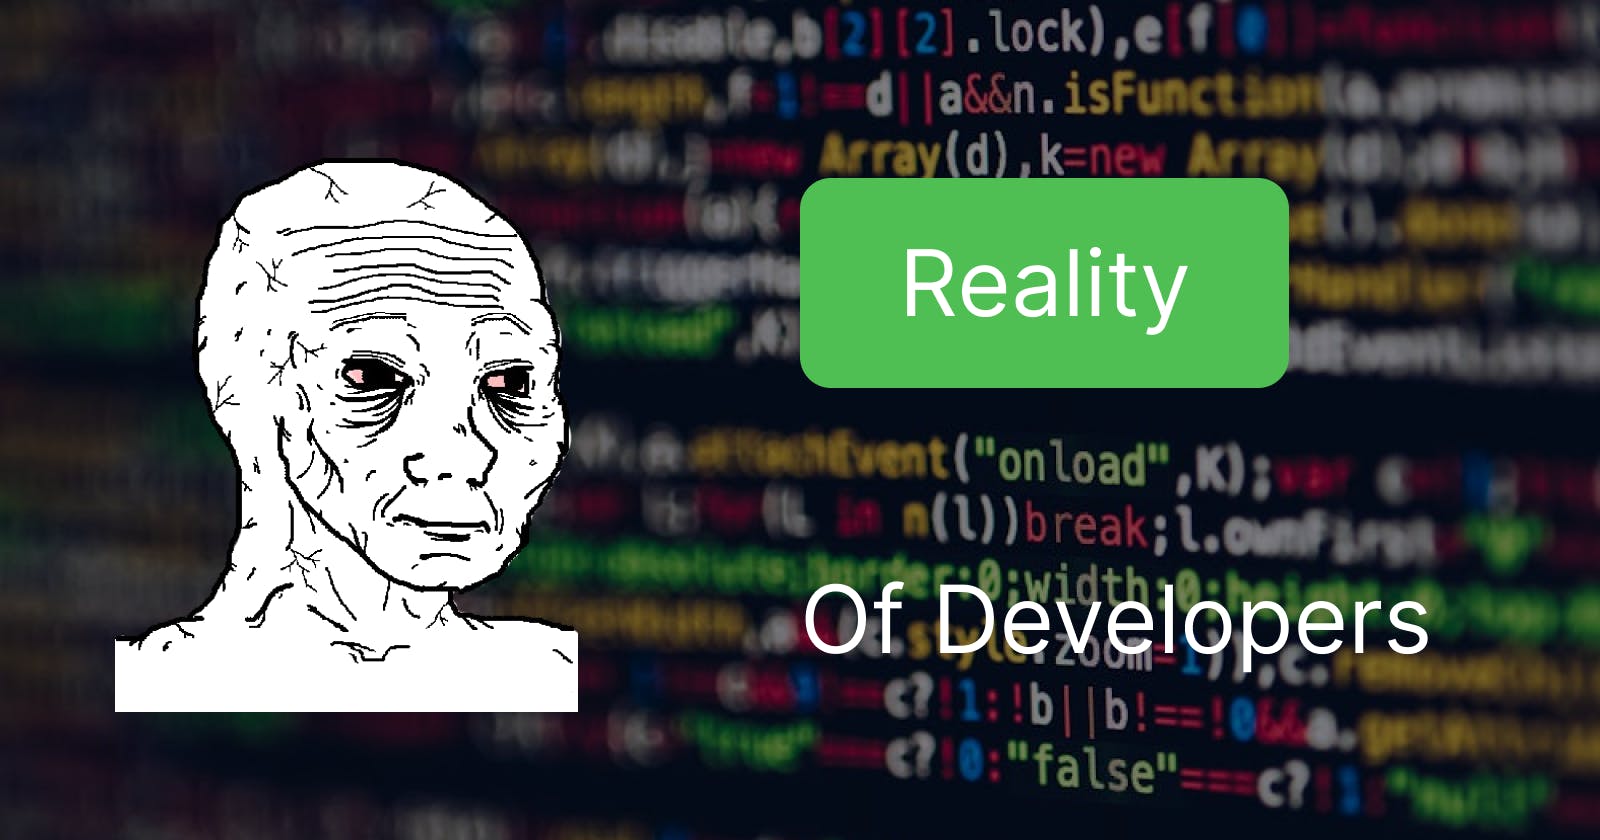 Reality Of being a developer